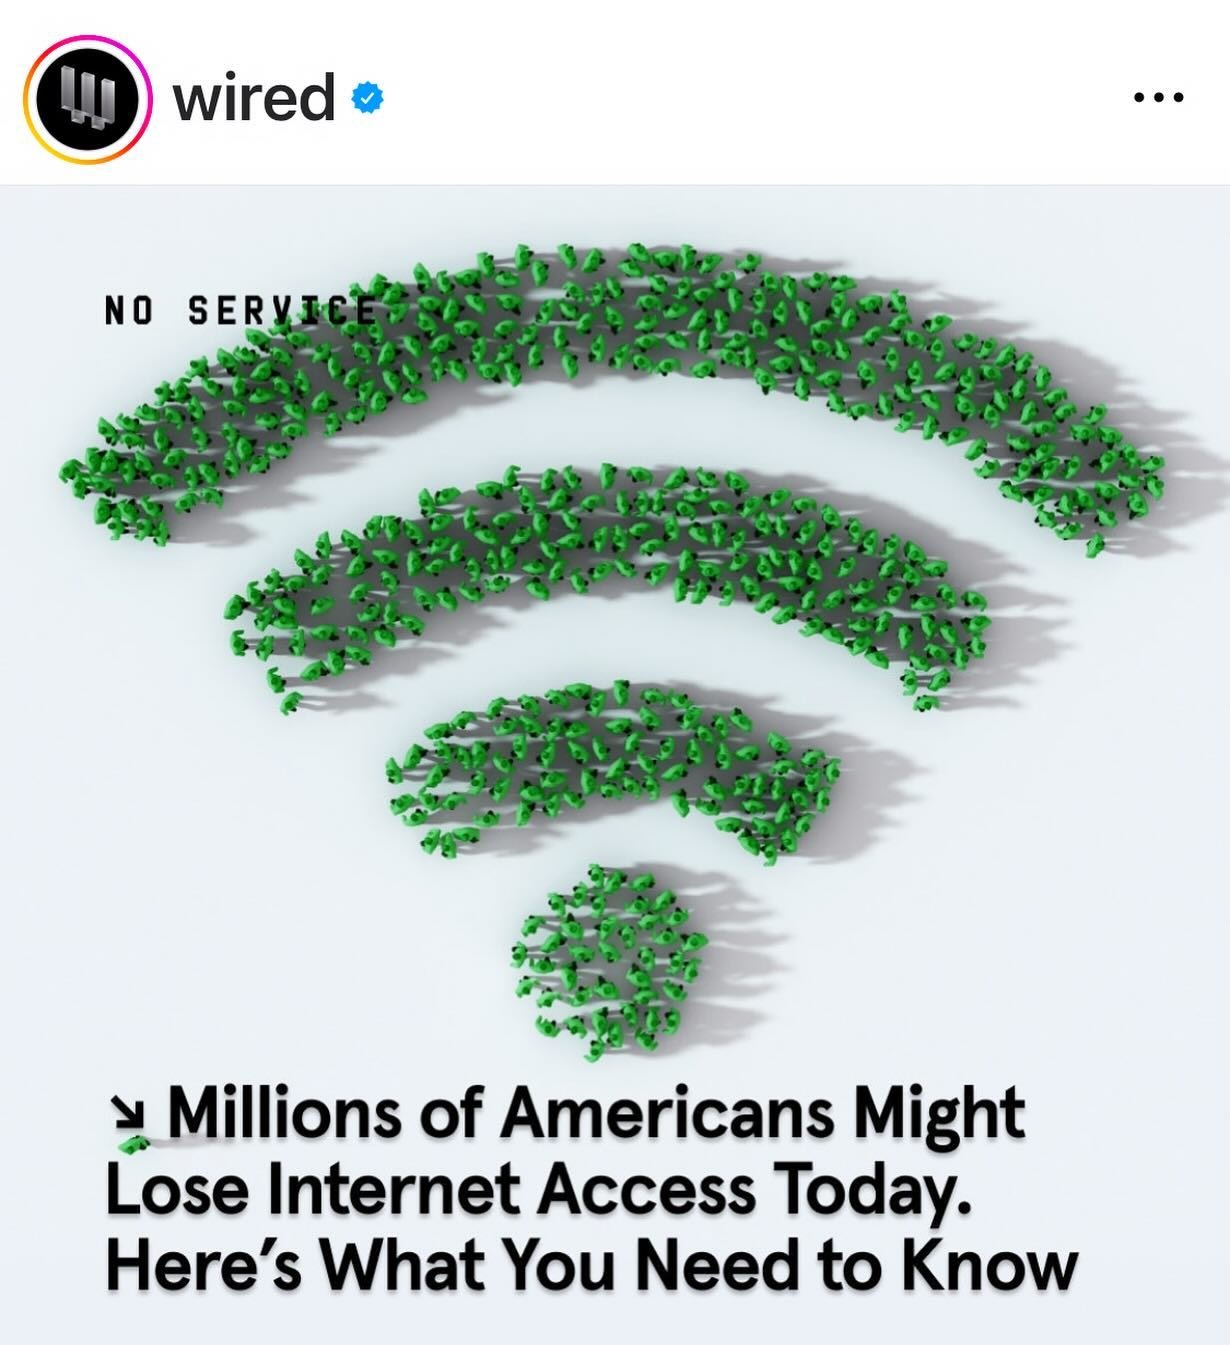 Strong coverage by Wired around the loss of internet access by millions of Americans. Read the full article here https://www.wired.com/story/affordable-connectivity-program-ending/?client_service_name=wired&amp;client_service_id=31209&amp;service_use